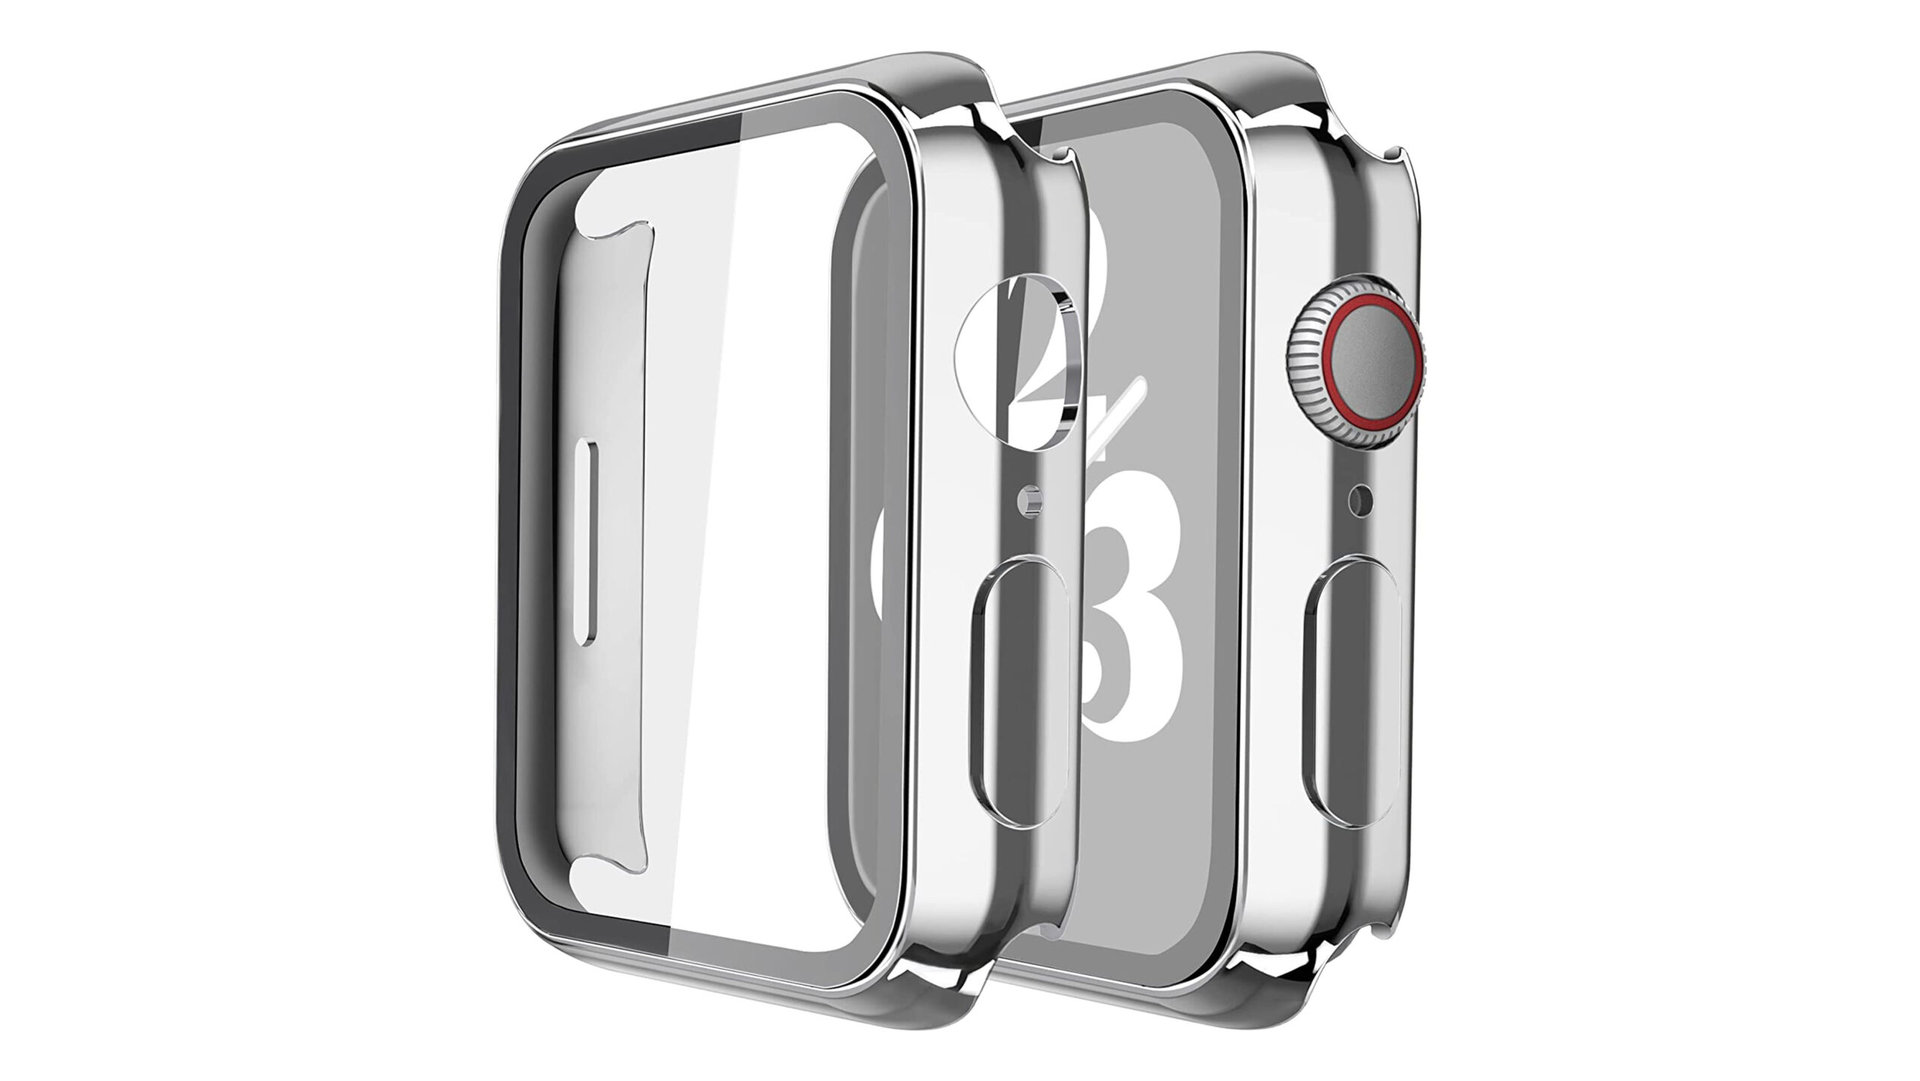 The Misxi Hard PC Apple Watch Series 8 case and screen protectors are available in packs of 2.